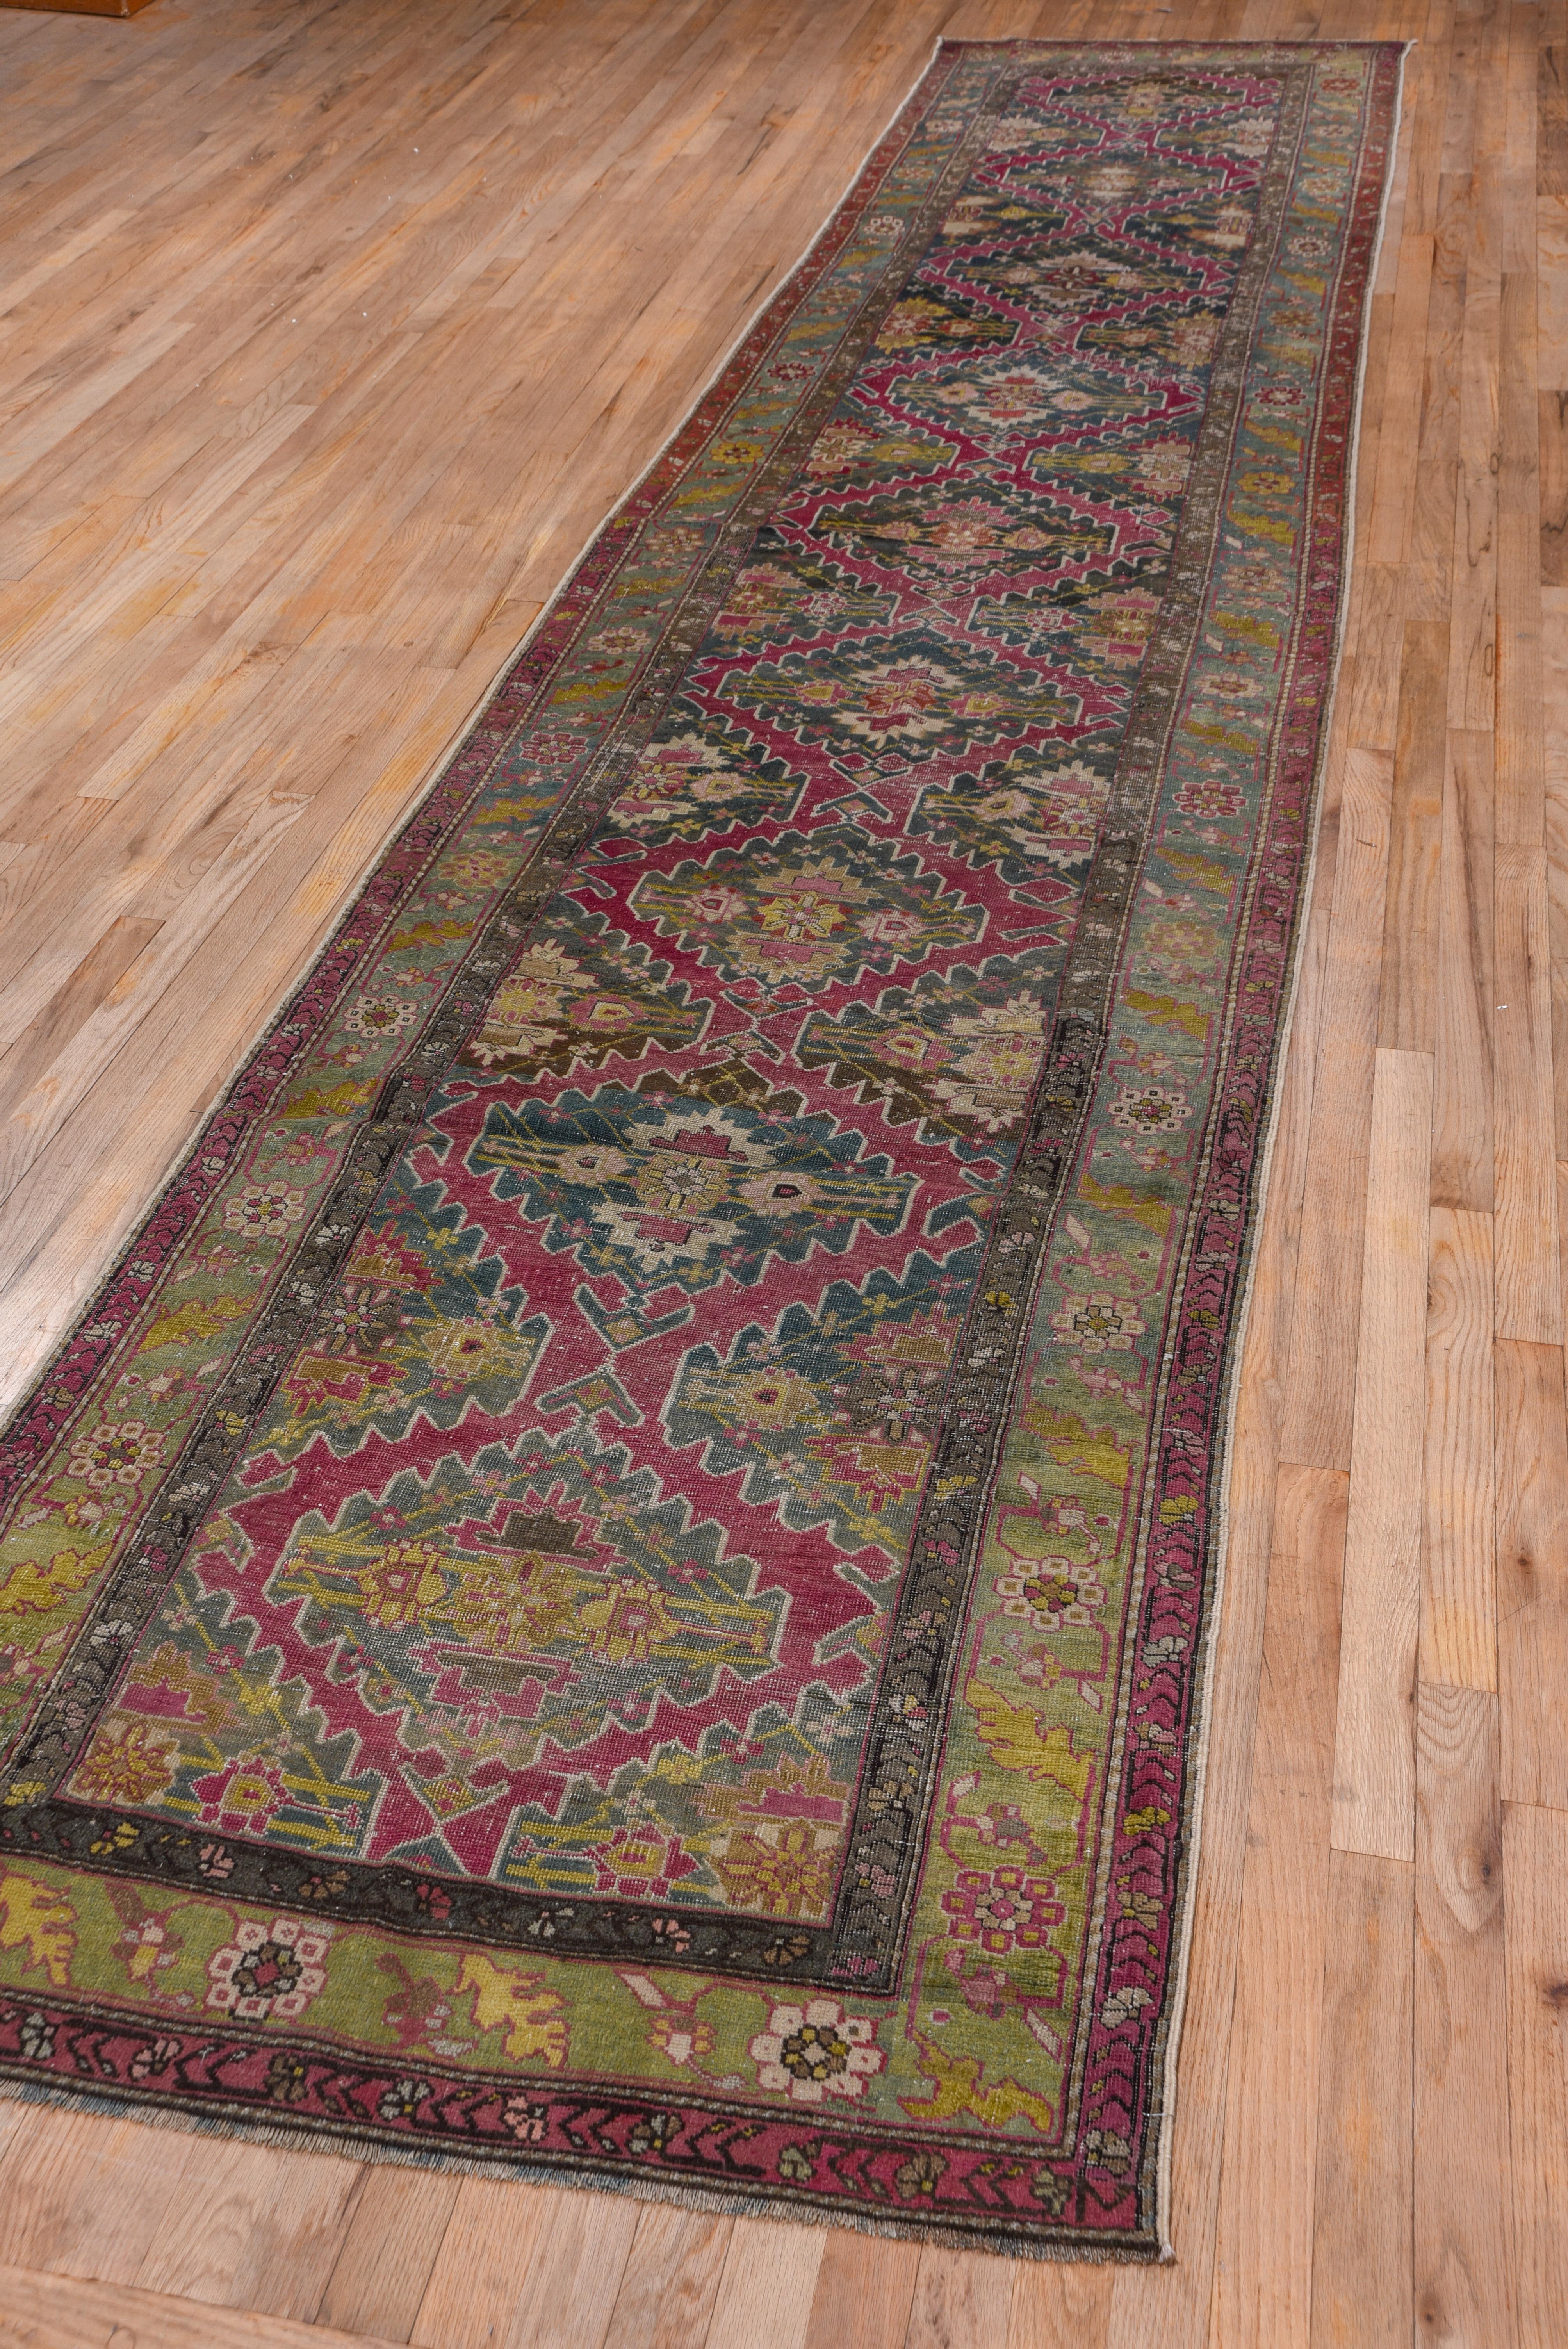 Hand-Knotted Long Antique Caucasian Karabagh Runner, Colorful, circa 1910s